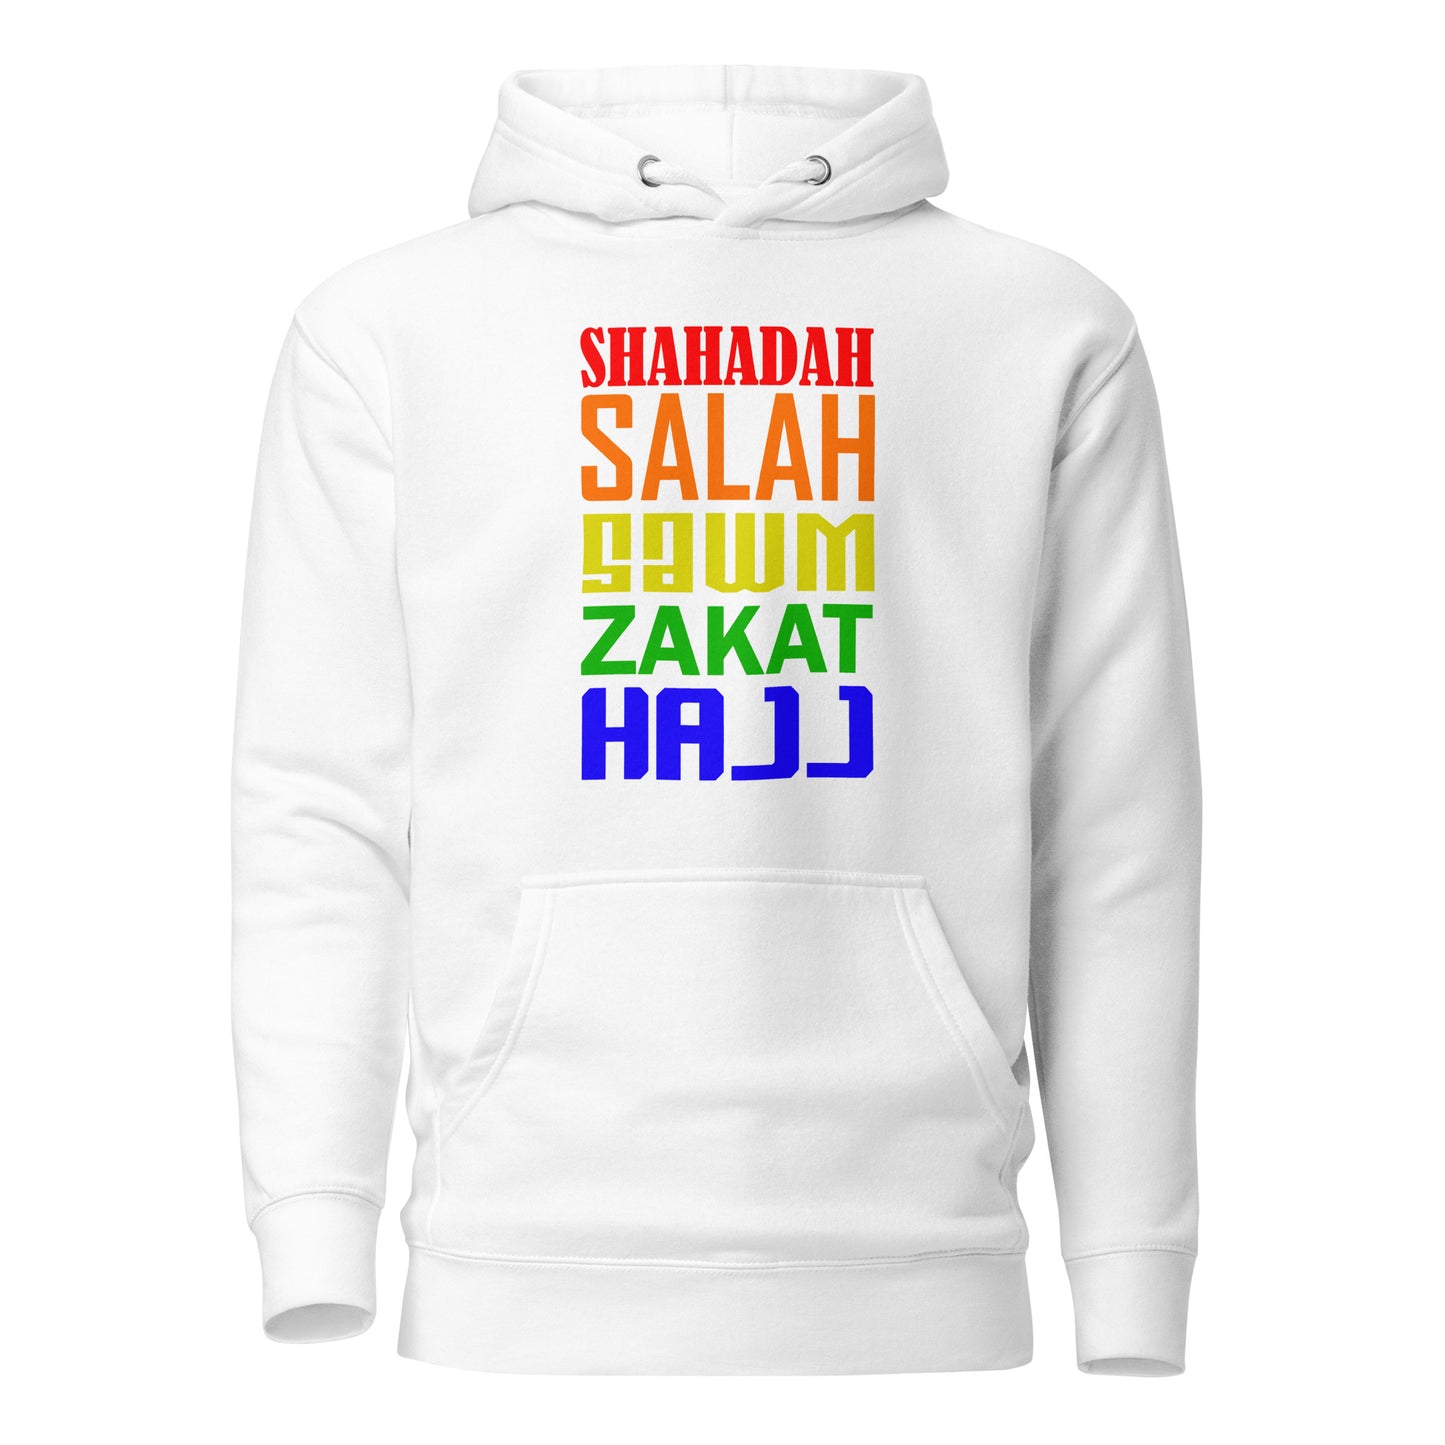 A white-coloured unisex hoodie with the text mentioning the five pillars of Islam - Shahadah, Salah, Sawm, Zakat, and Hajj - in five different colours: red, orange, yellow, green, and blue.